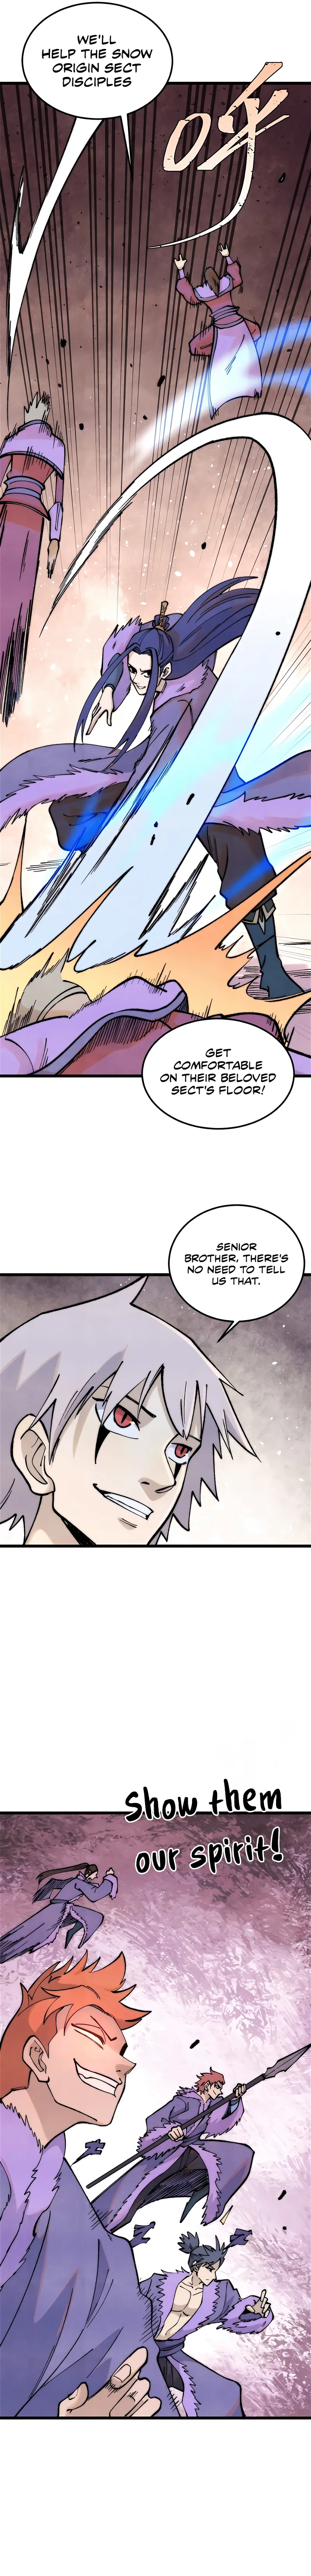 All Hail The Sect Leader Chapter 302 page 6